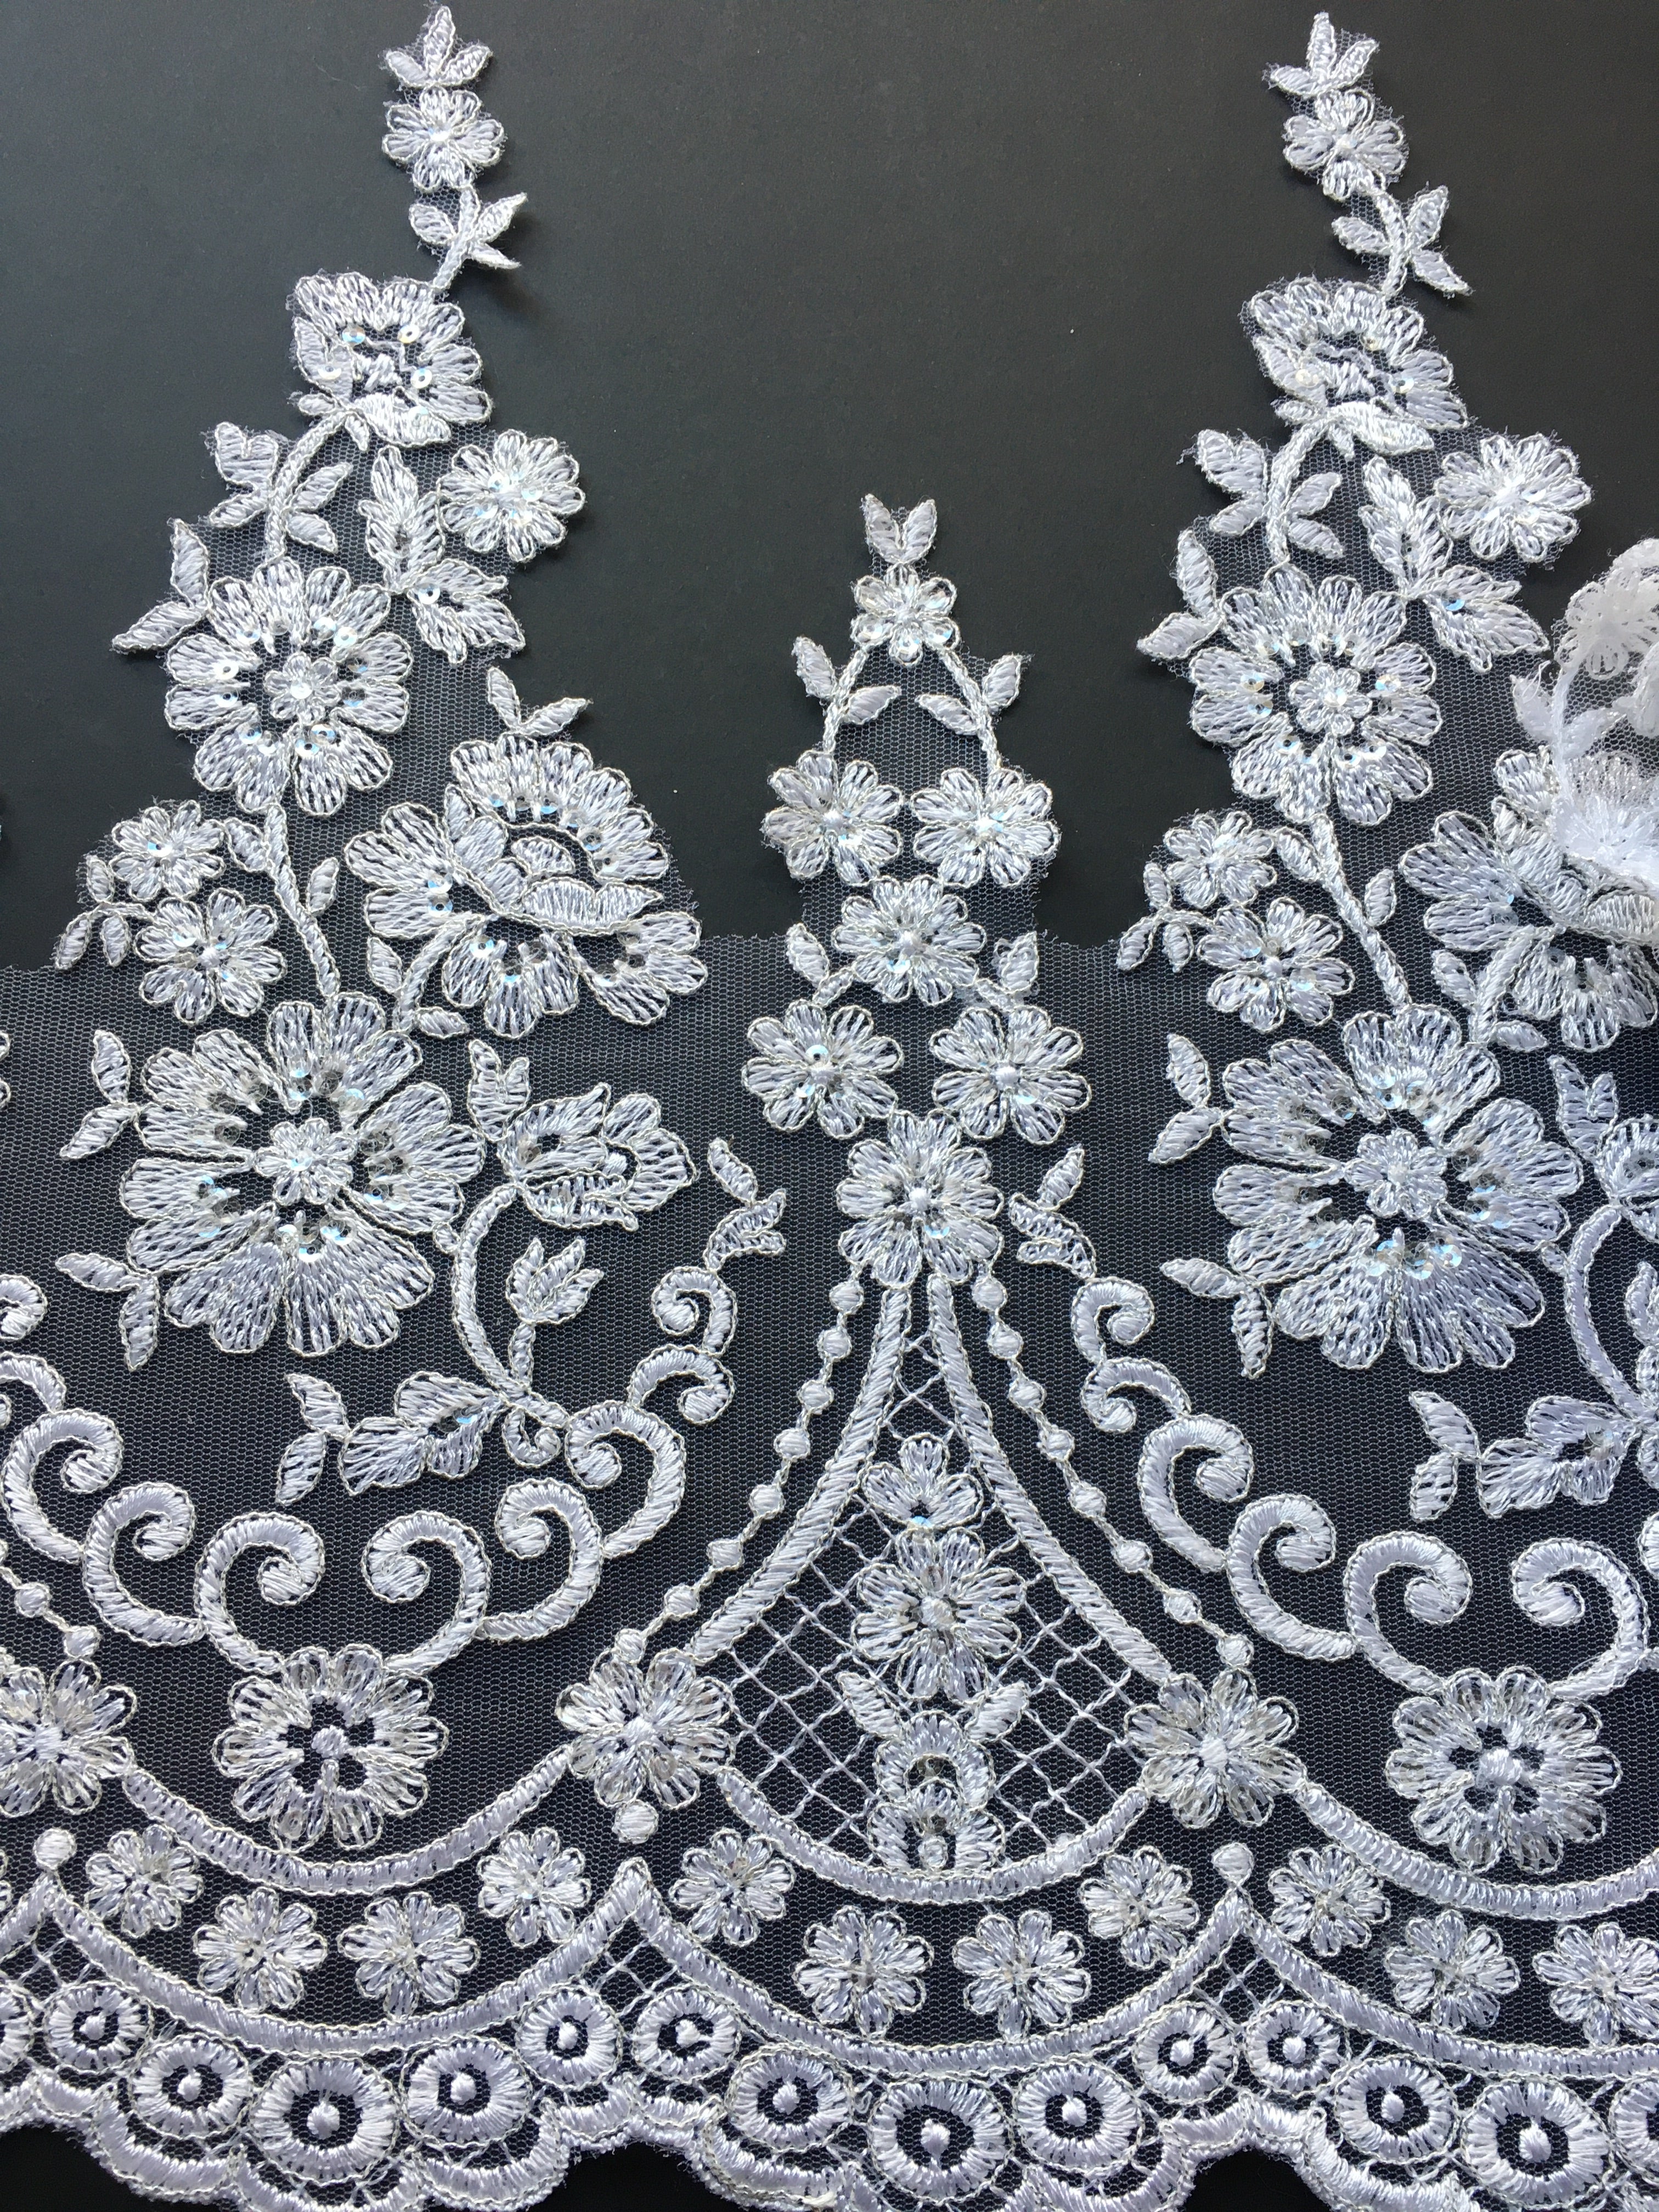 Stunning white lace with a floral pattern.  Each part of the design is outlined with silver thread and the flowers are embellished with silver sequins making the lace shimmer under lights.